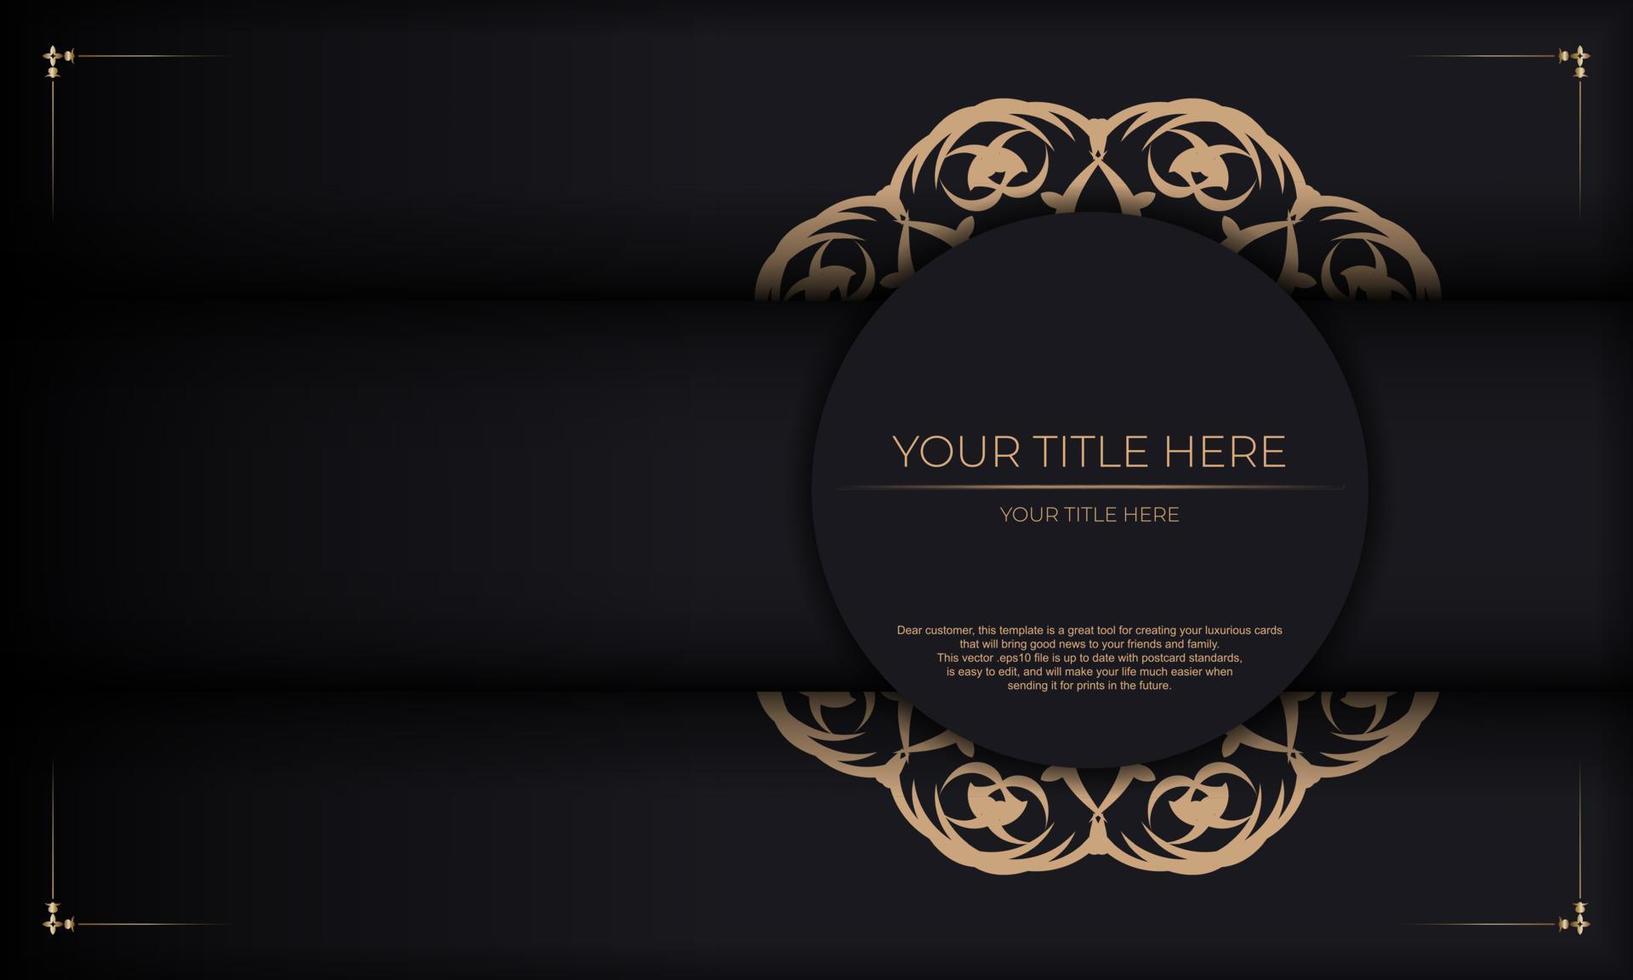 Invitation card design with vintage patterns. Black banner with luxurious ornaments and place for your text. vector